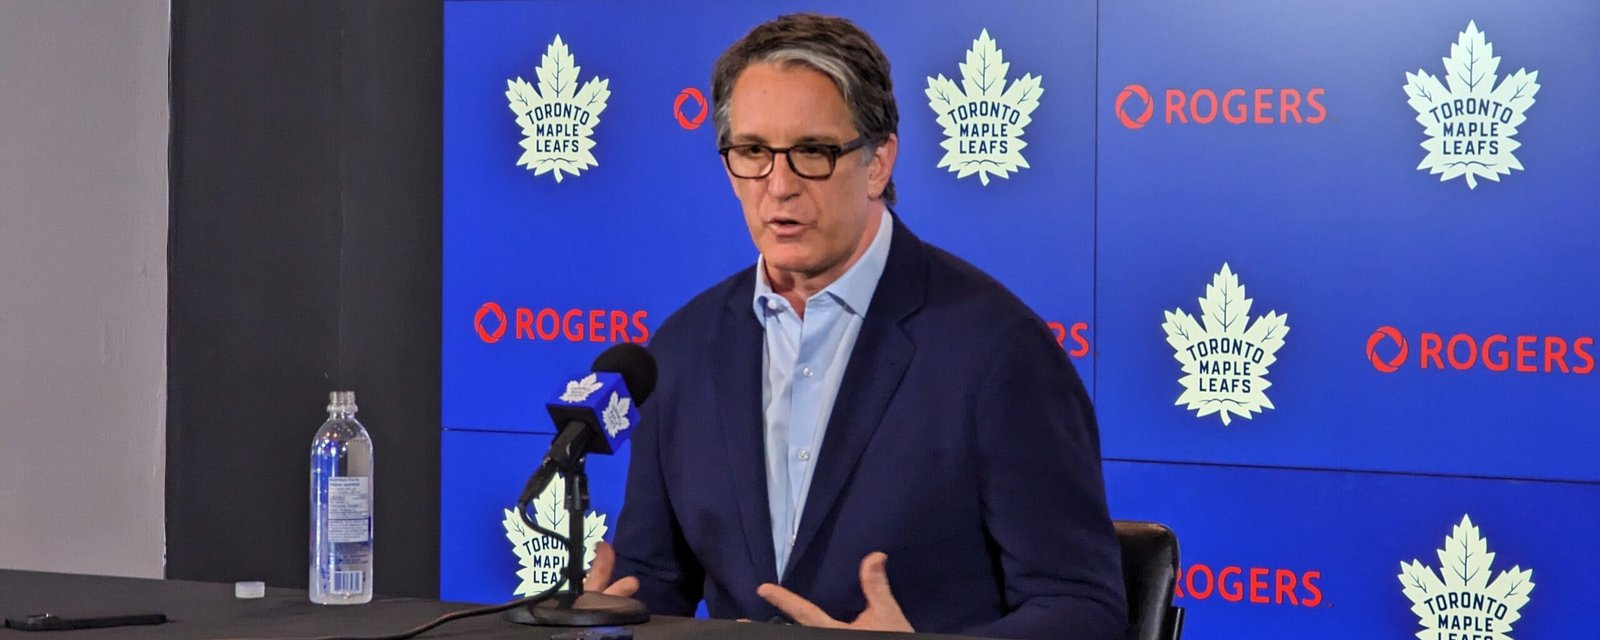 Significant issue arises as Maple Leafs attempt to name new GM today